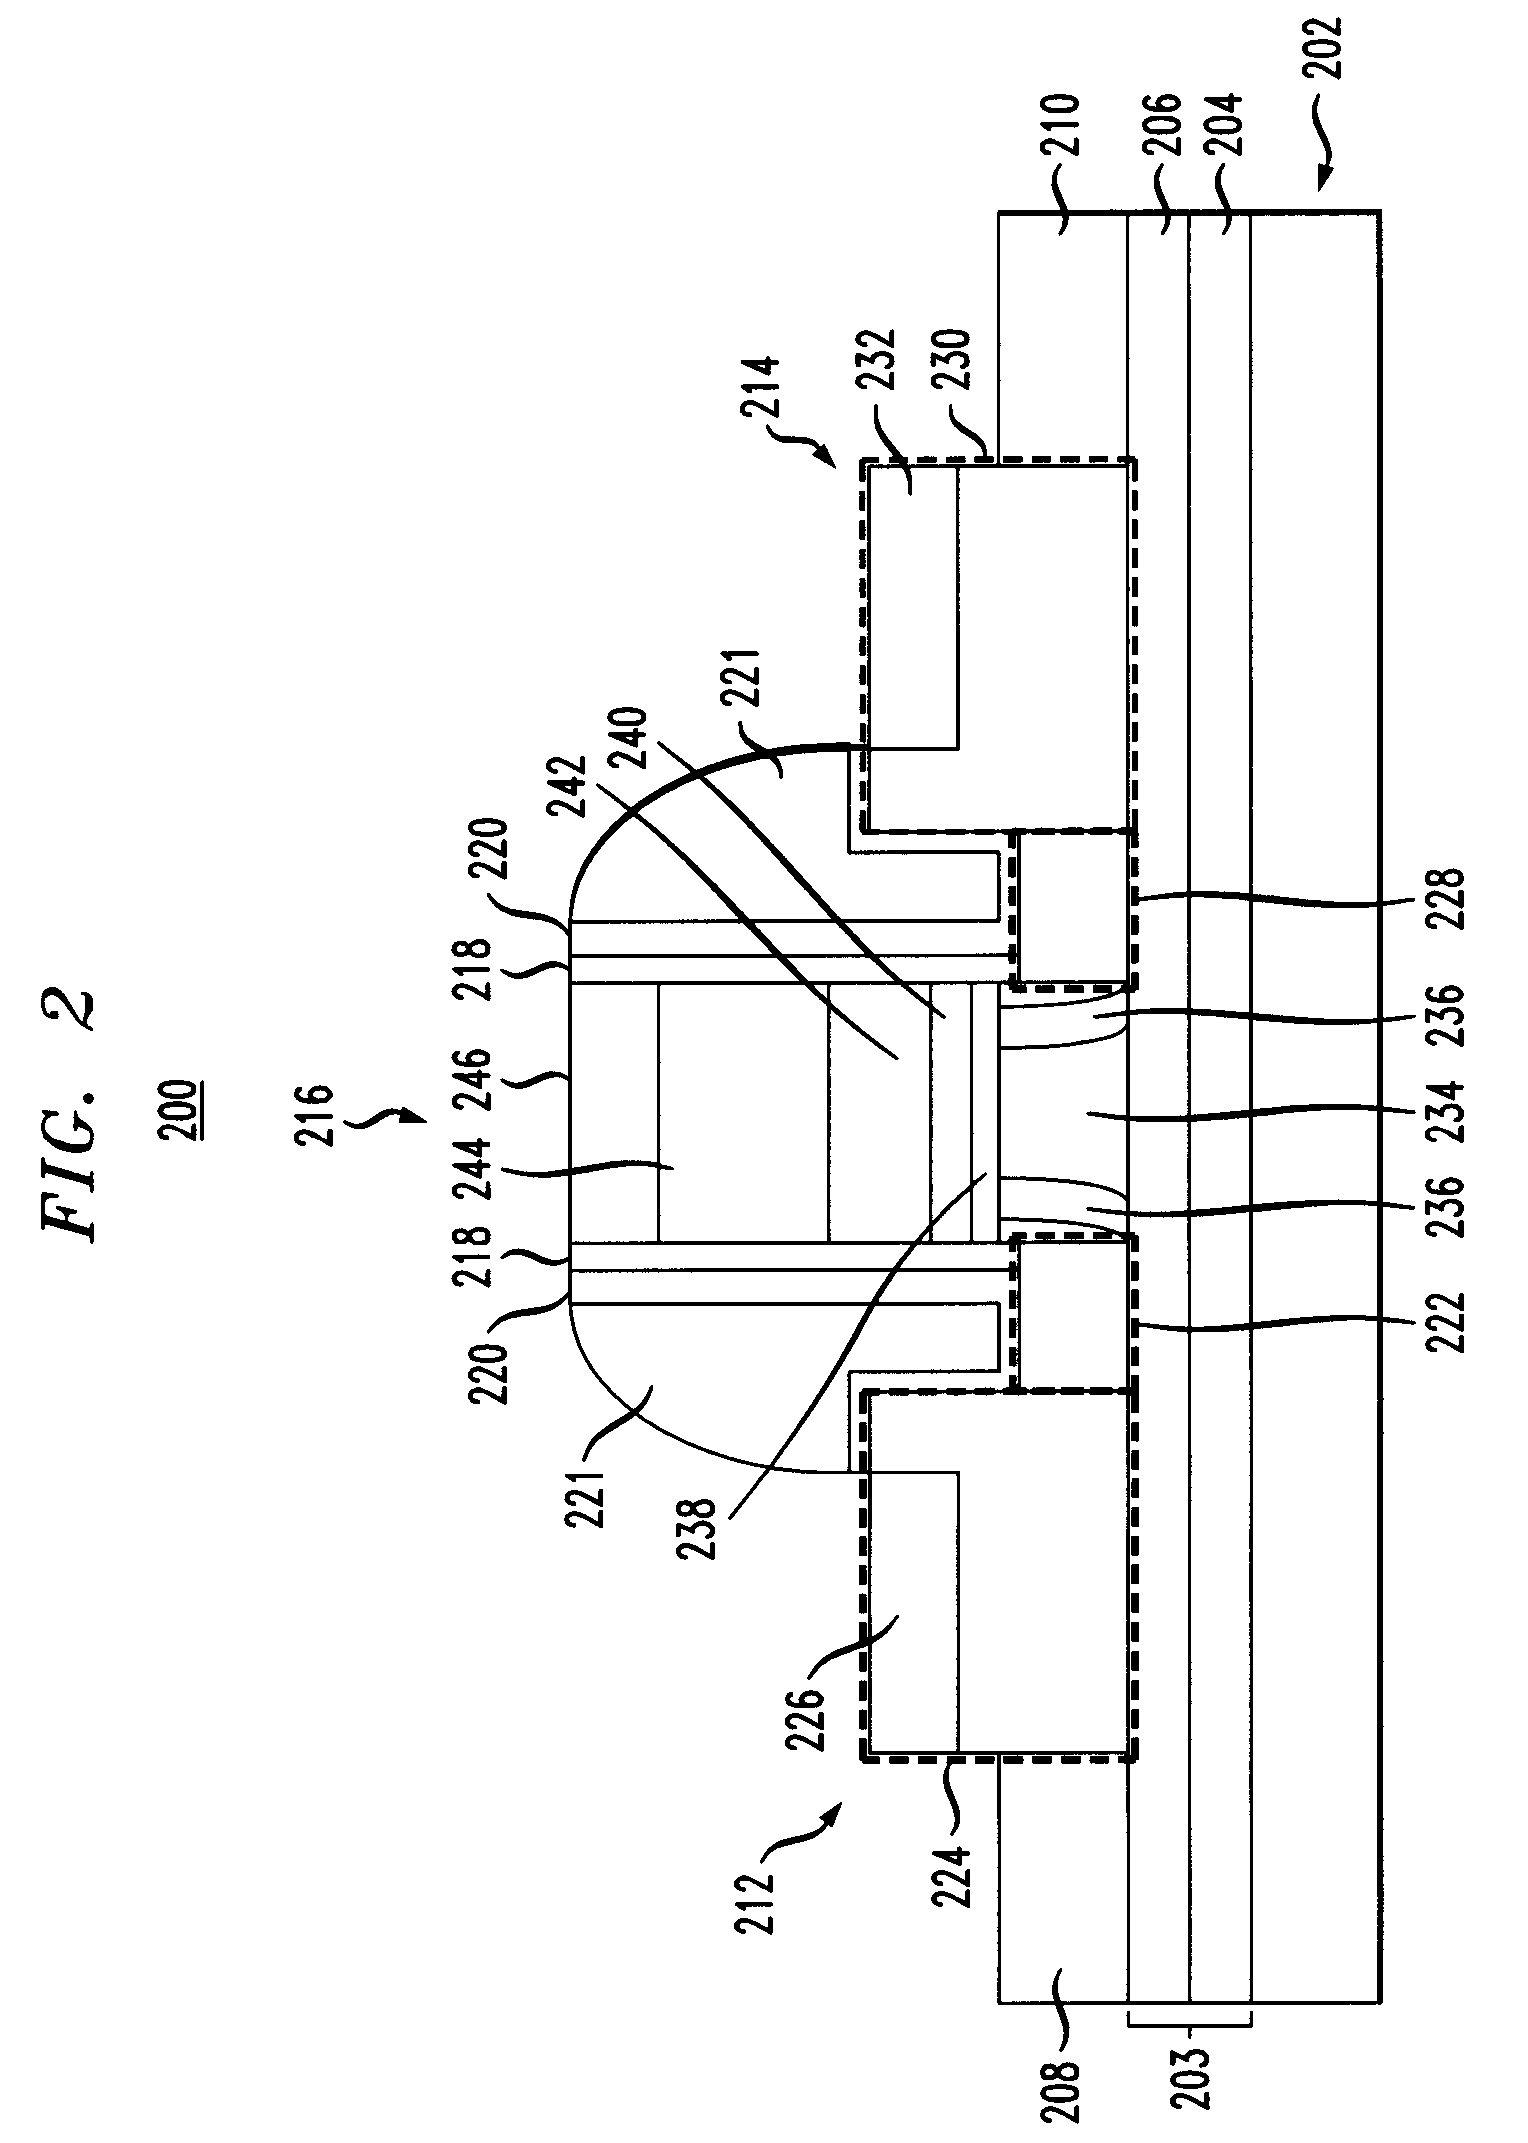 Metal-gated MOSFET devices having scaled gate stack thickness